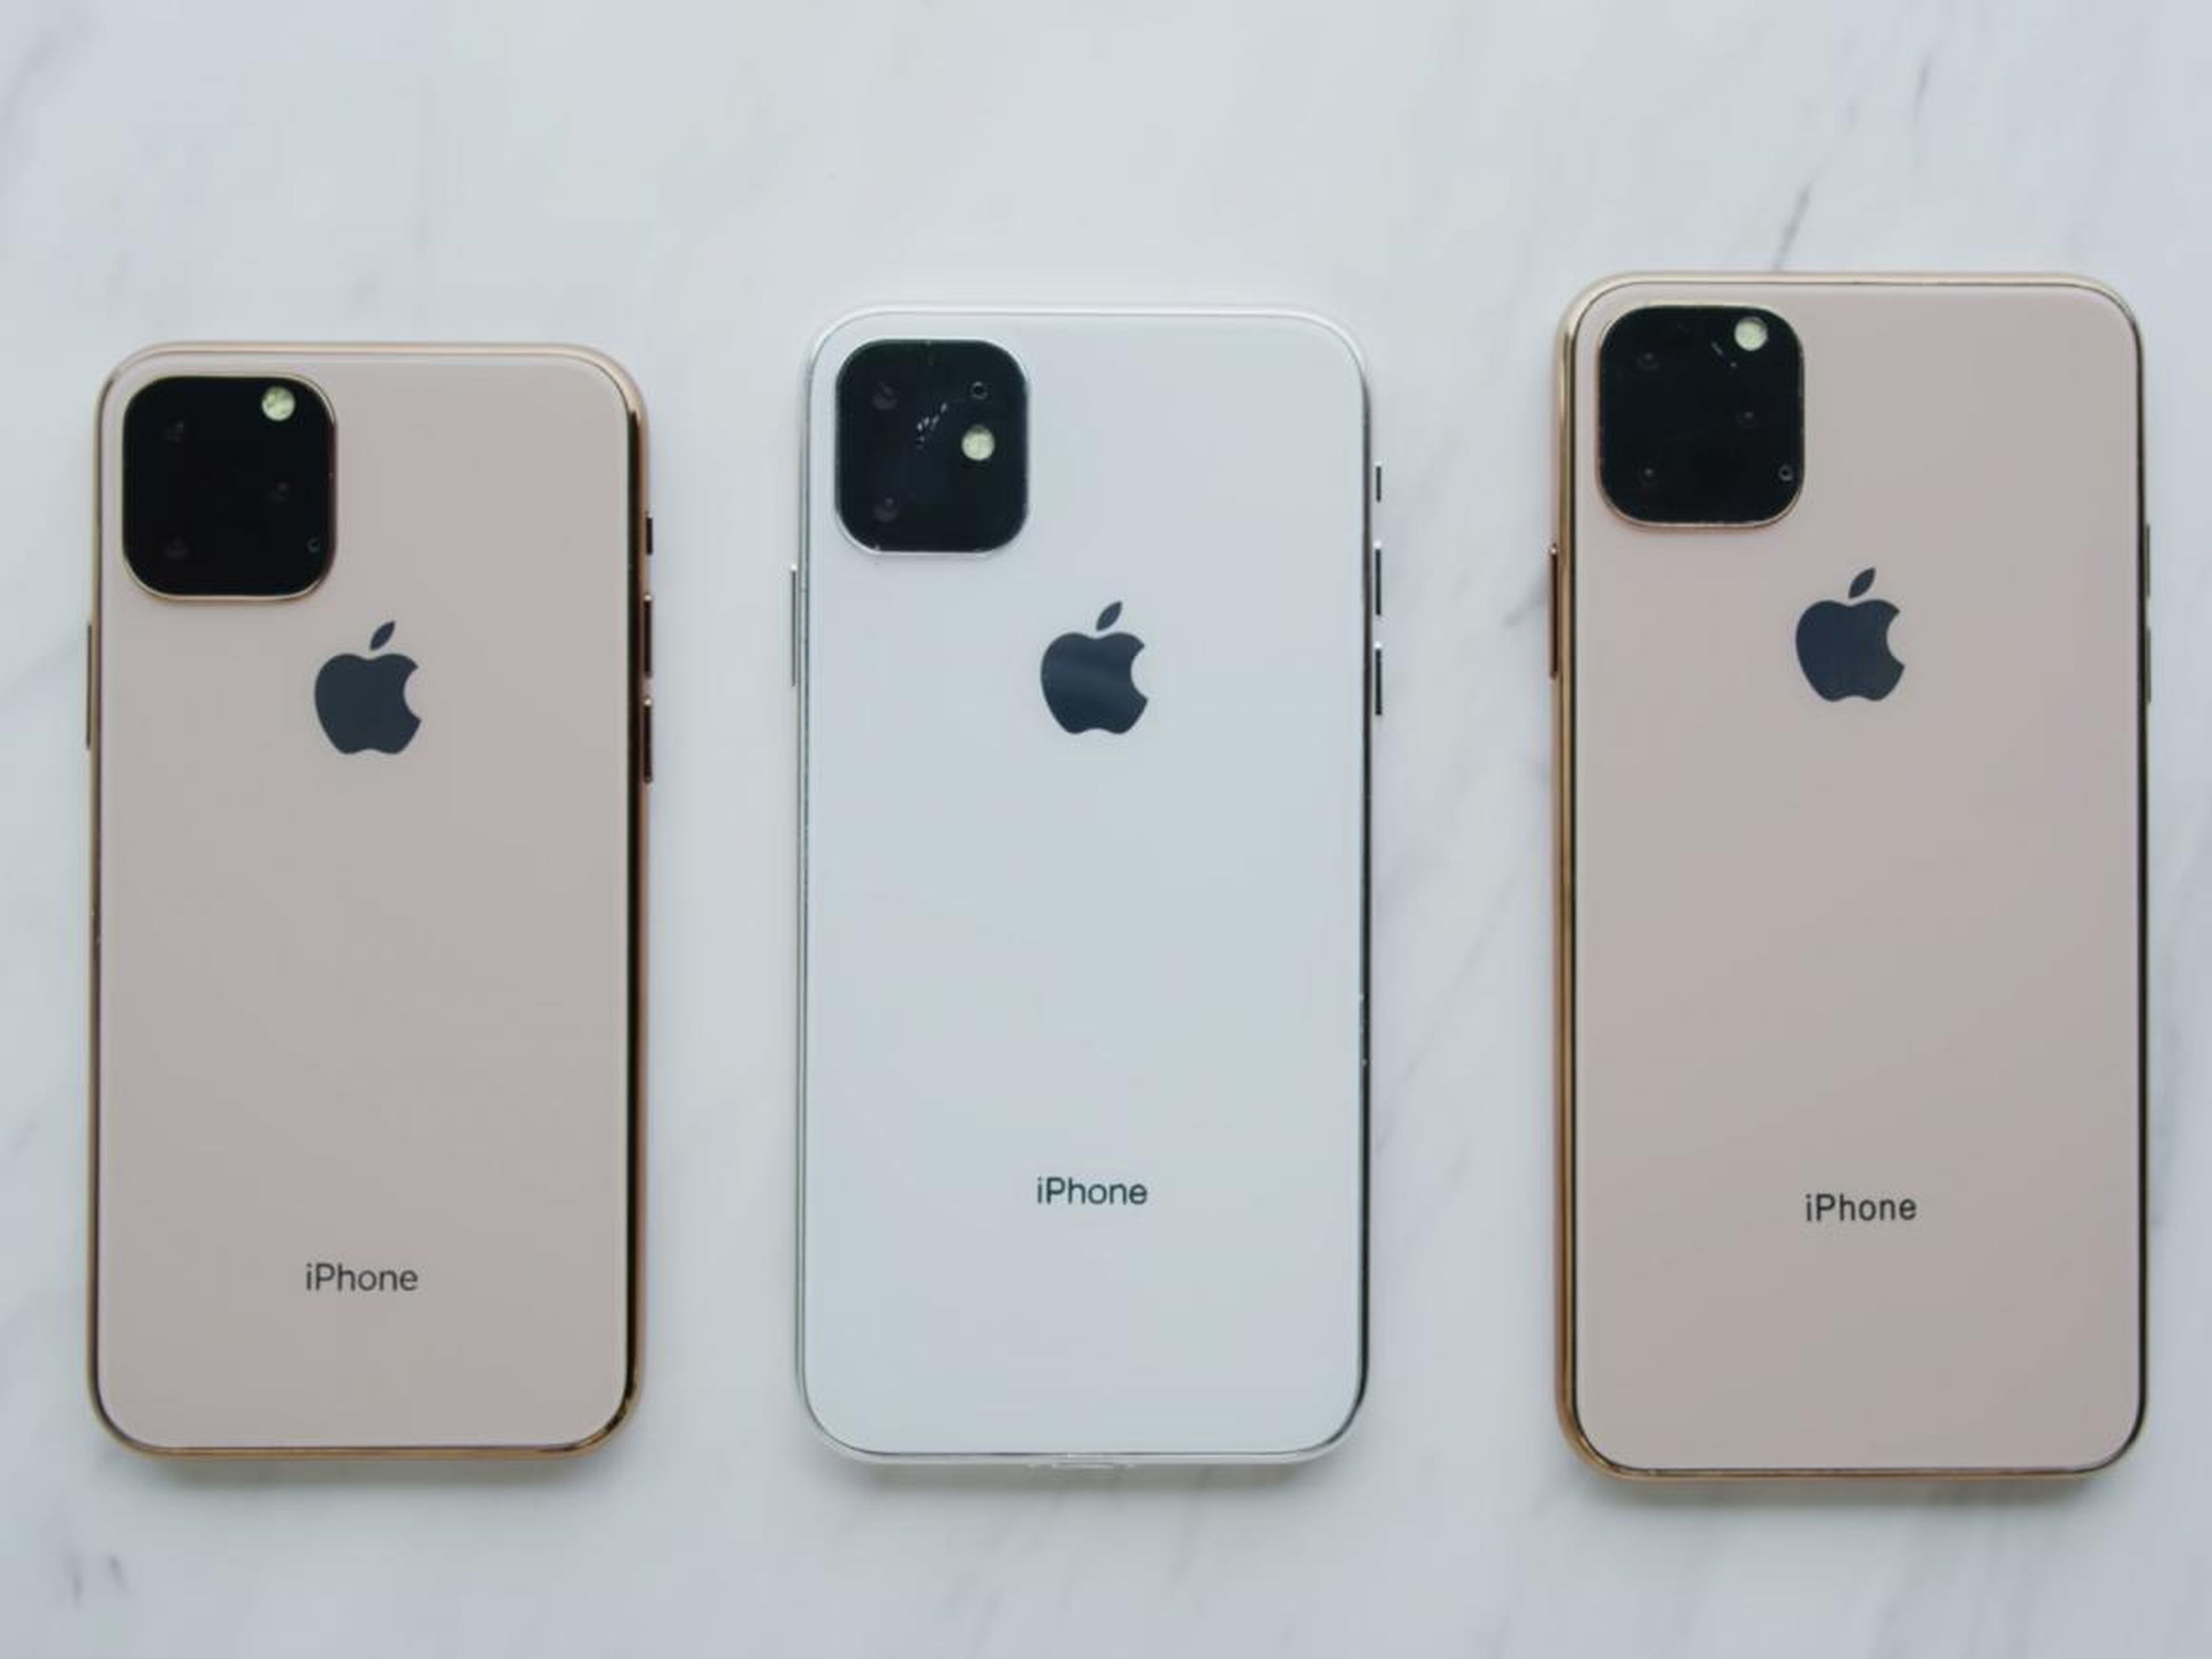 iPhone 11 machine-milled dummy models, from left: iPhone 11 Pro, iPhone 11, iPhone 11 Pro Max.